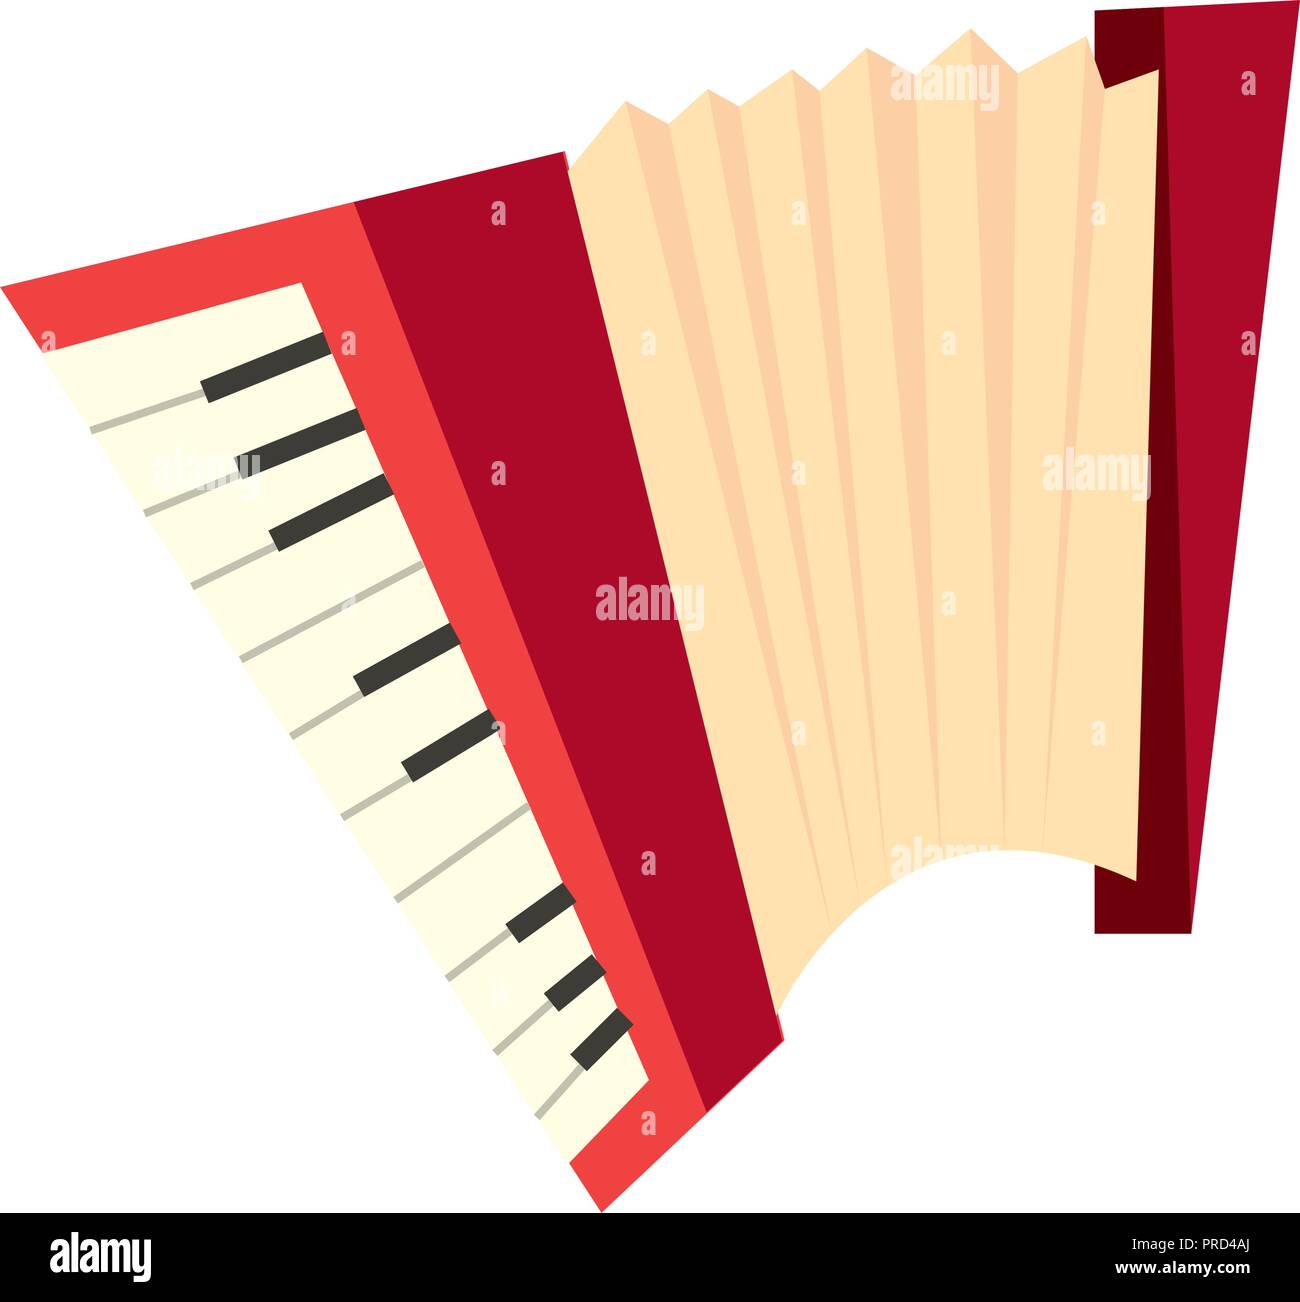 accordion wind musical instrument image vector illustration Stock ...